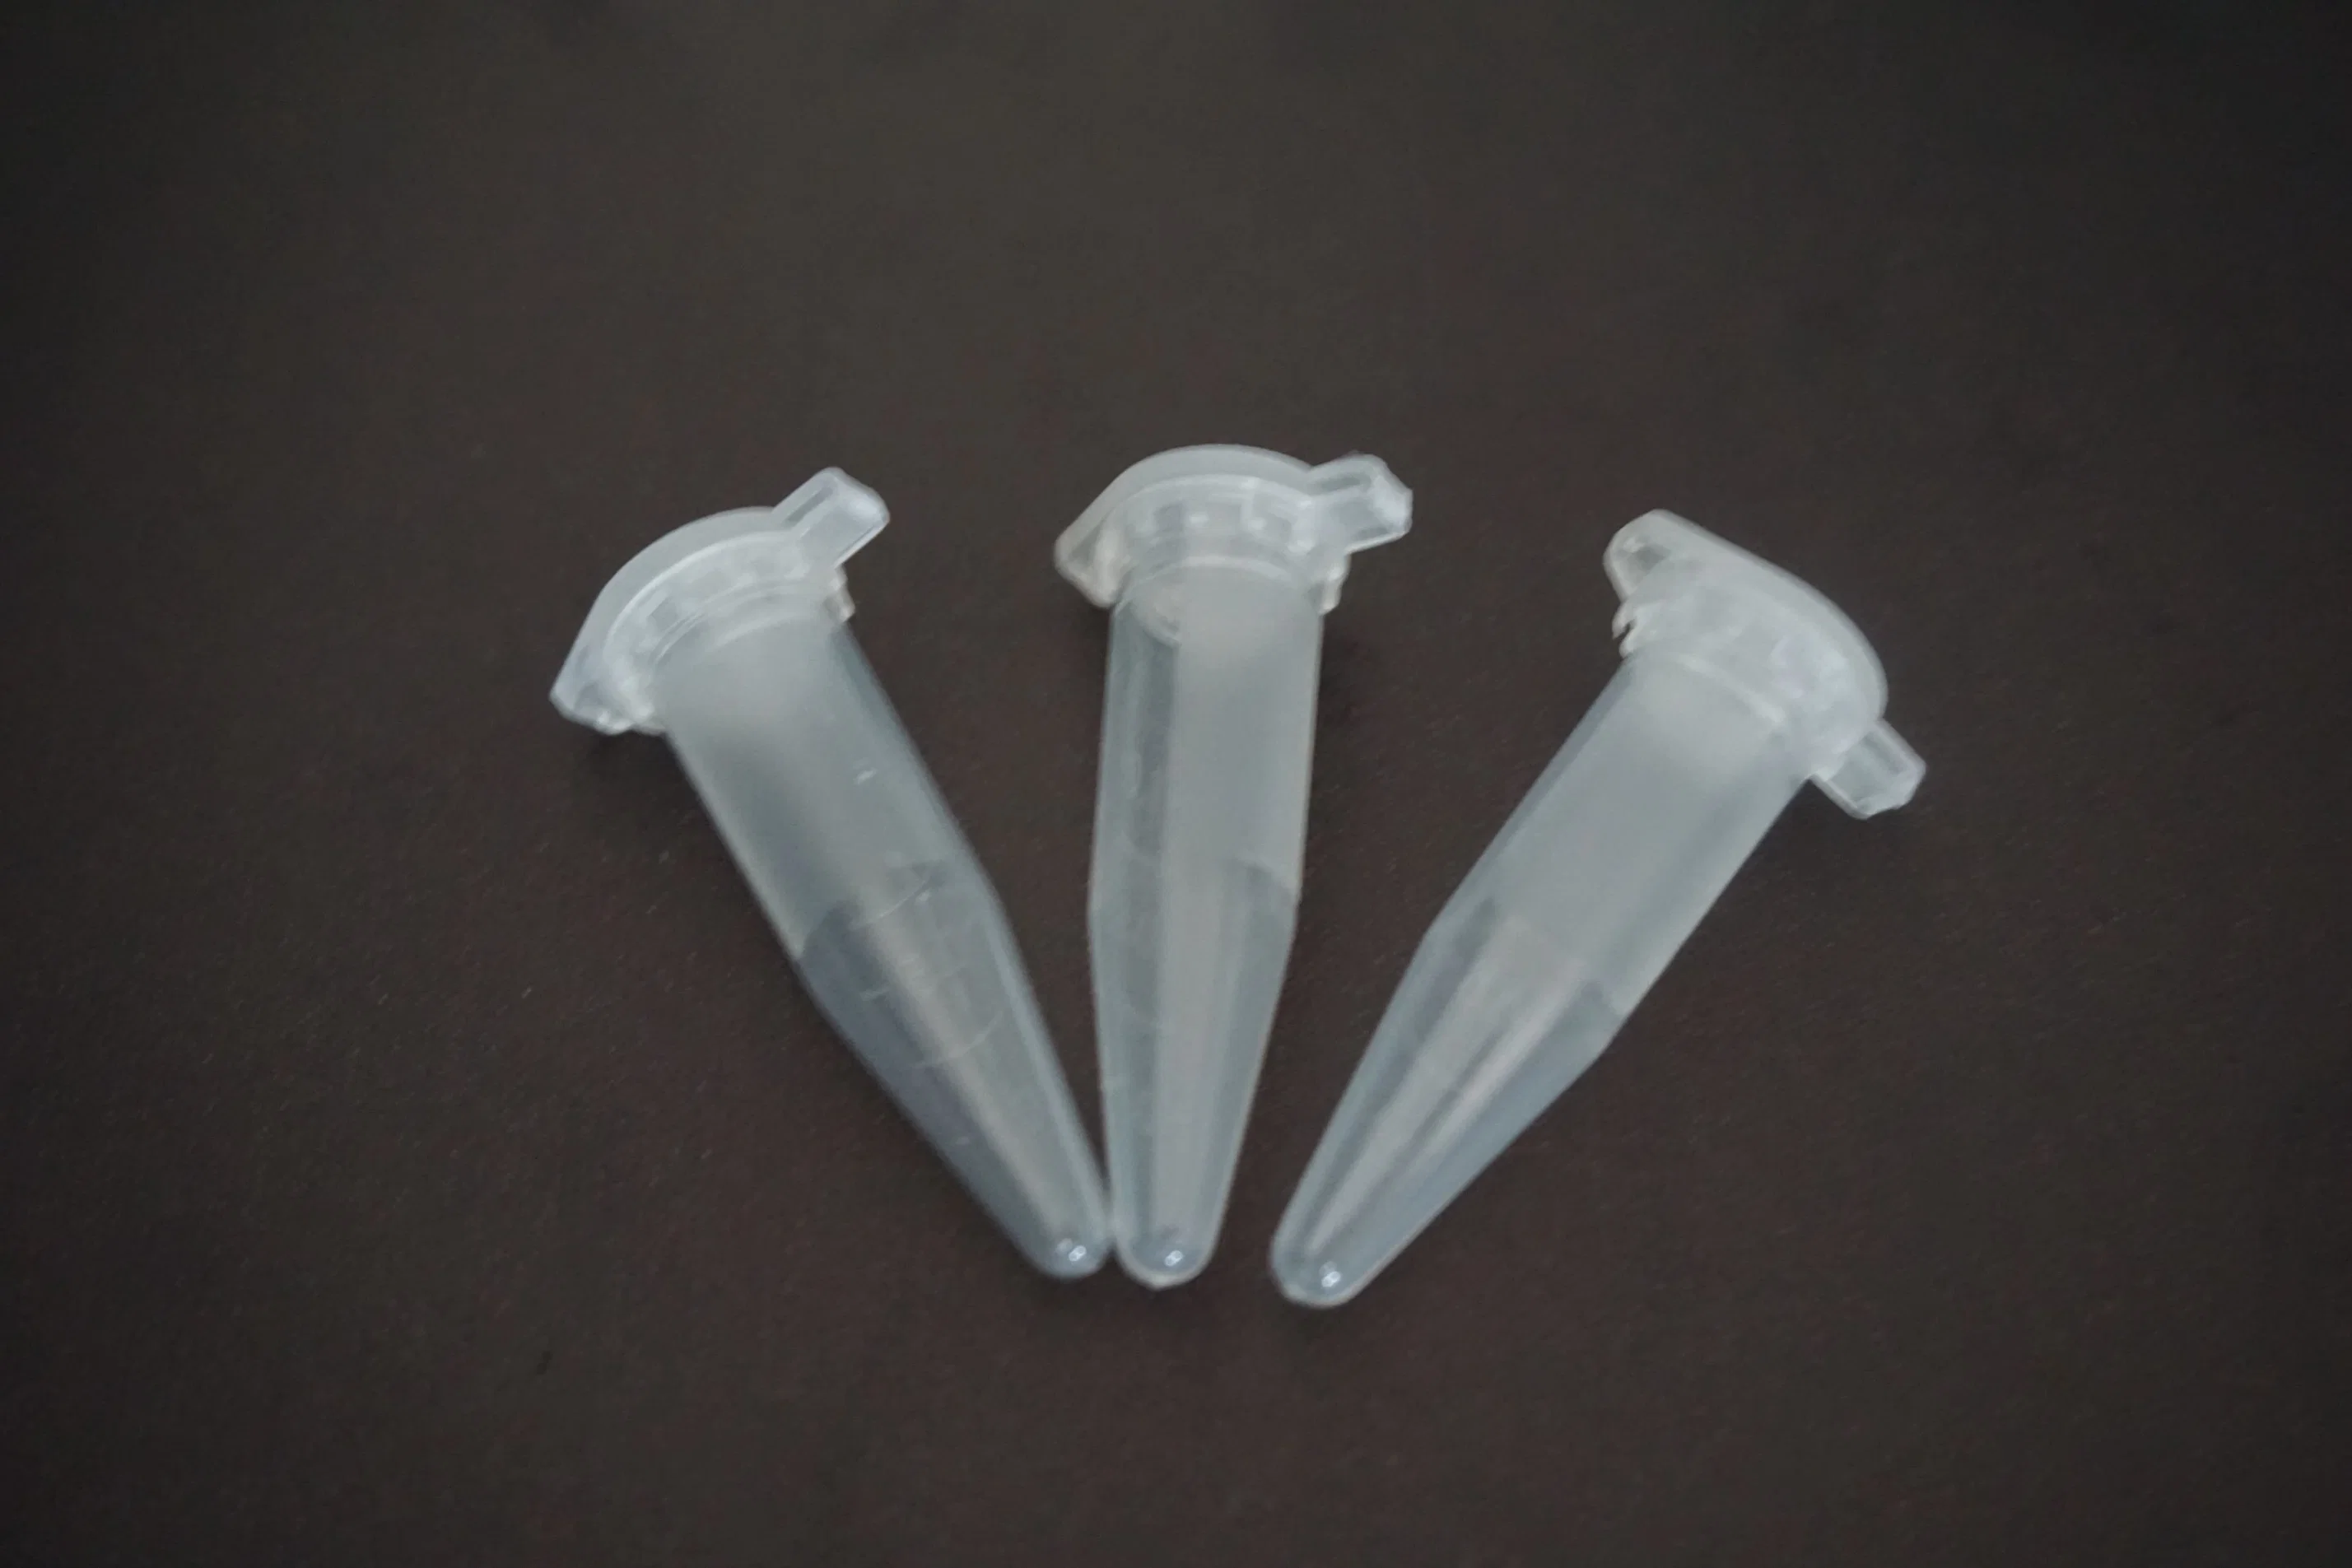 Lab Supplies in Stock Transparent 0.2ml PCR Tube with Flat Cover